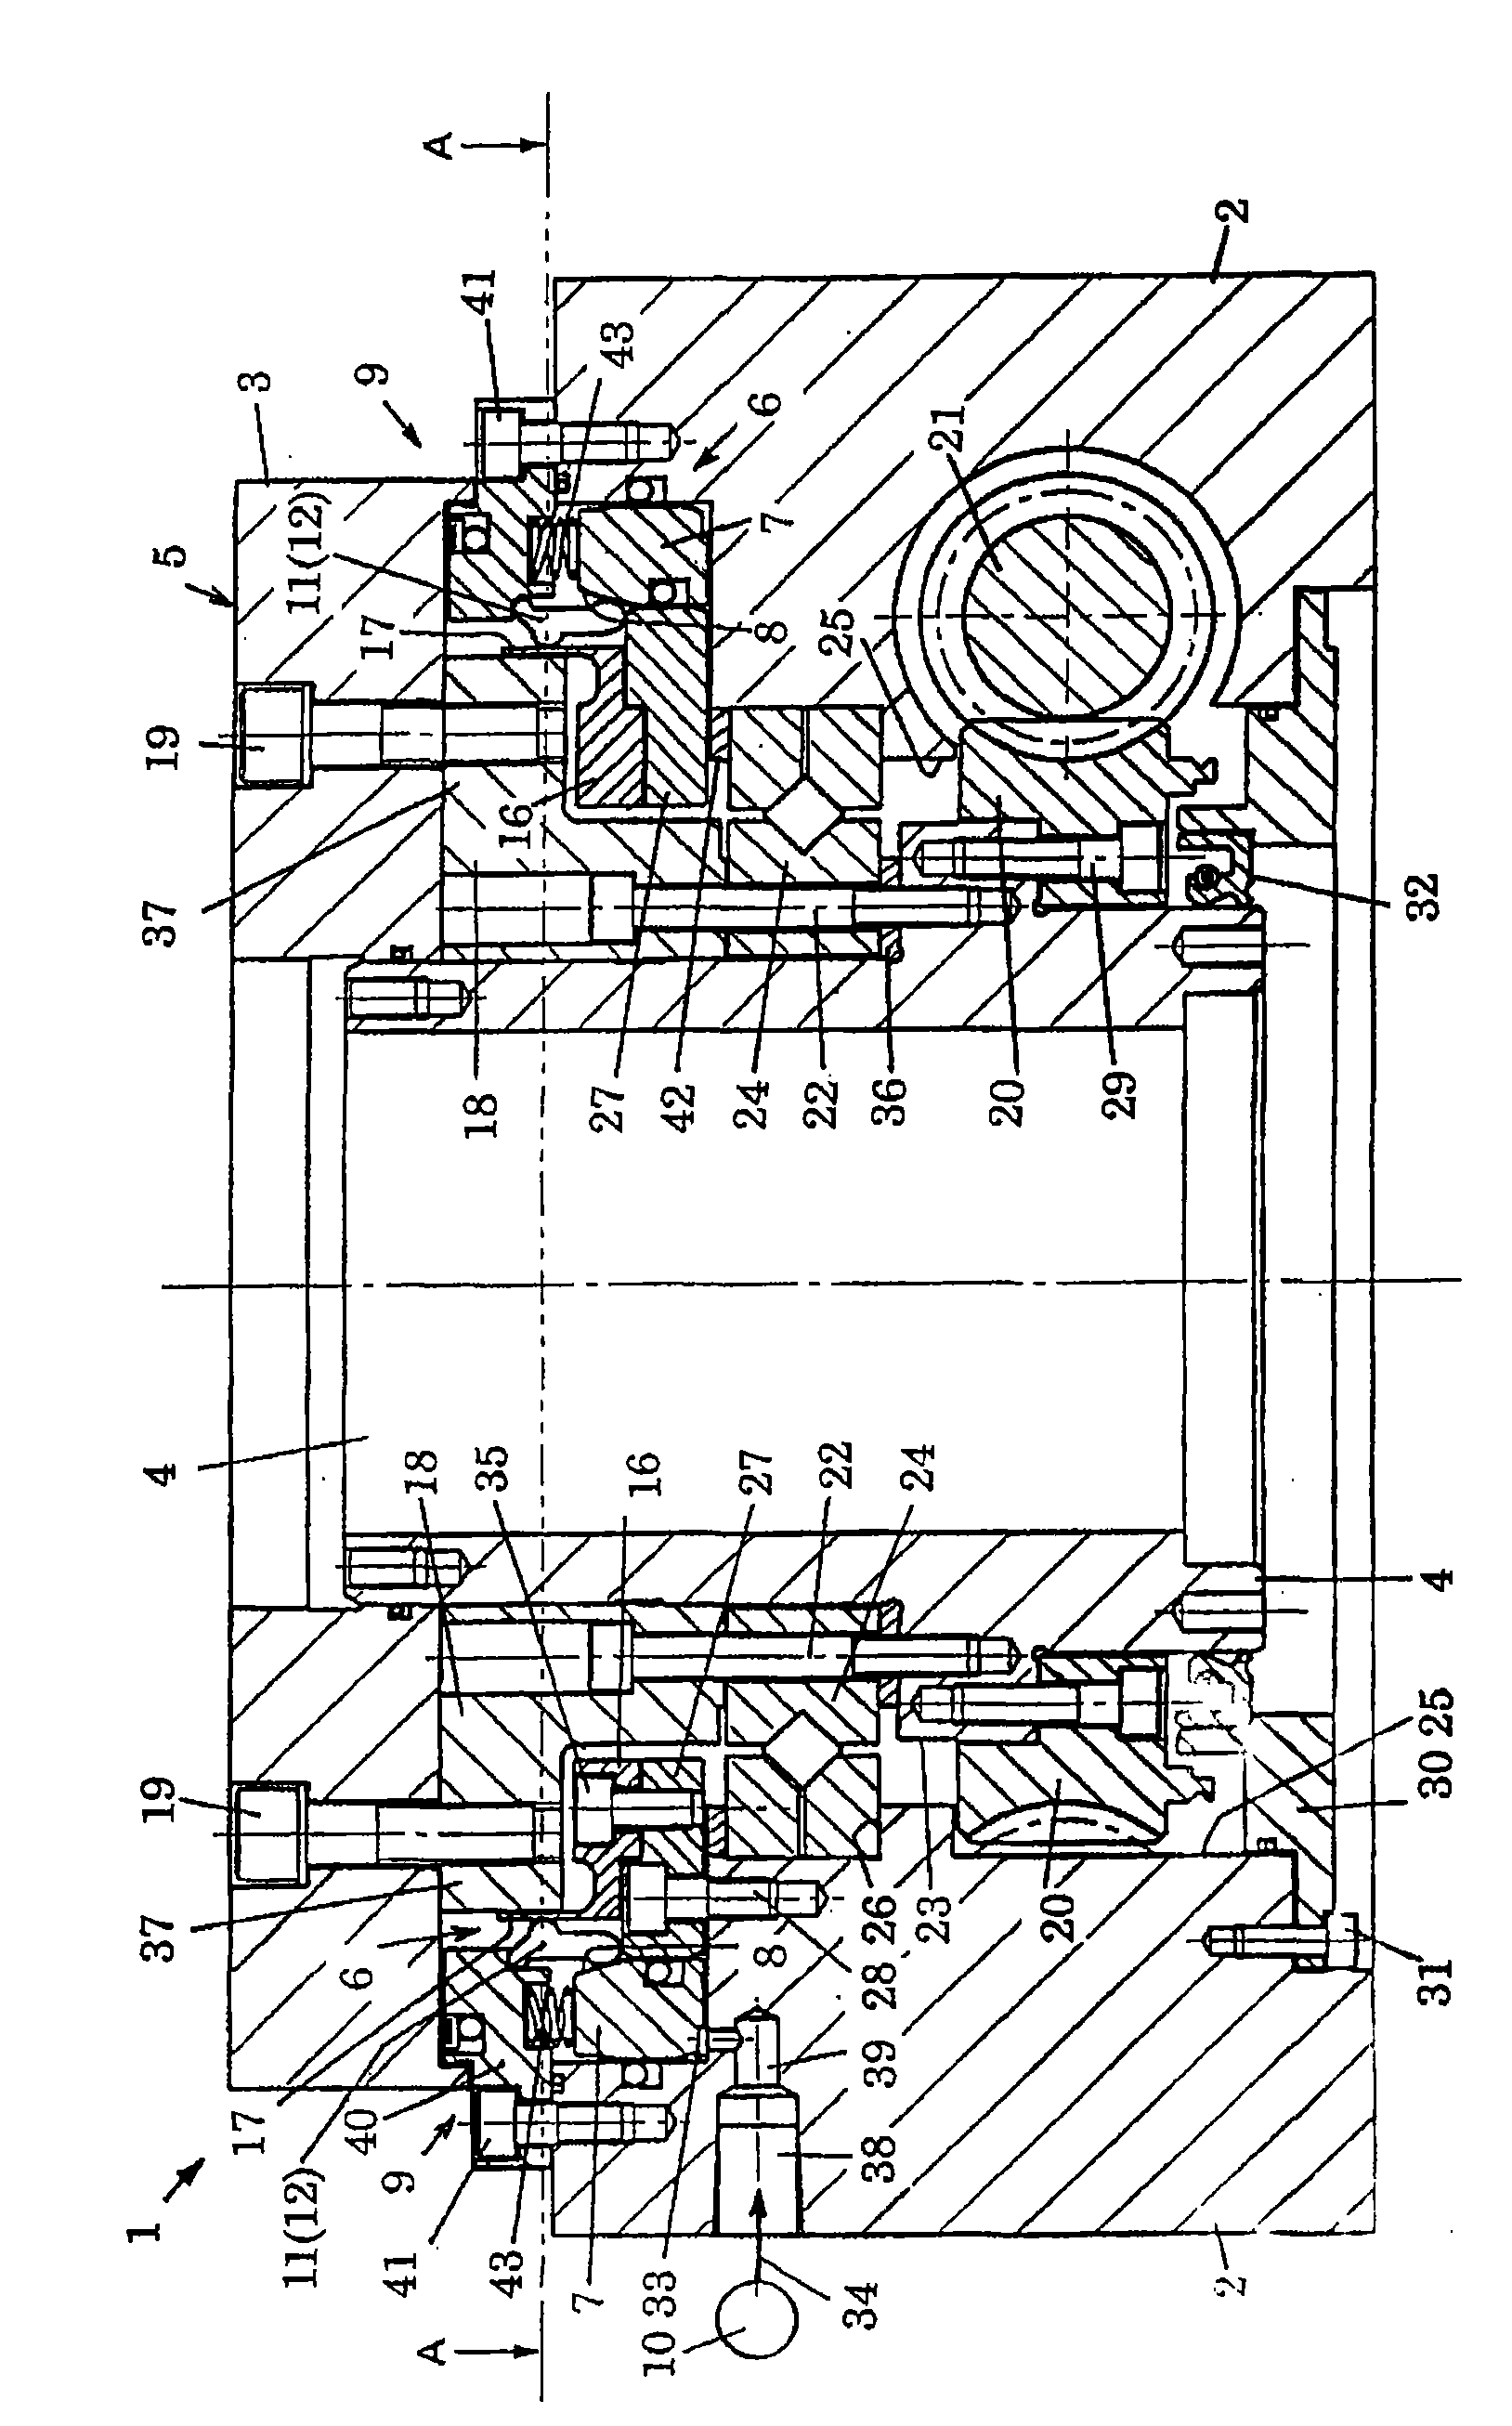 Rotary index device in machine tool